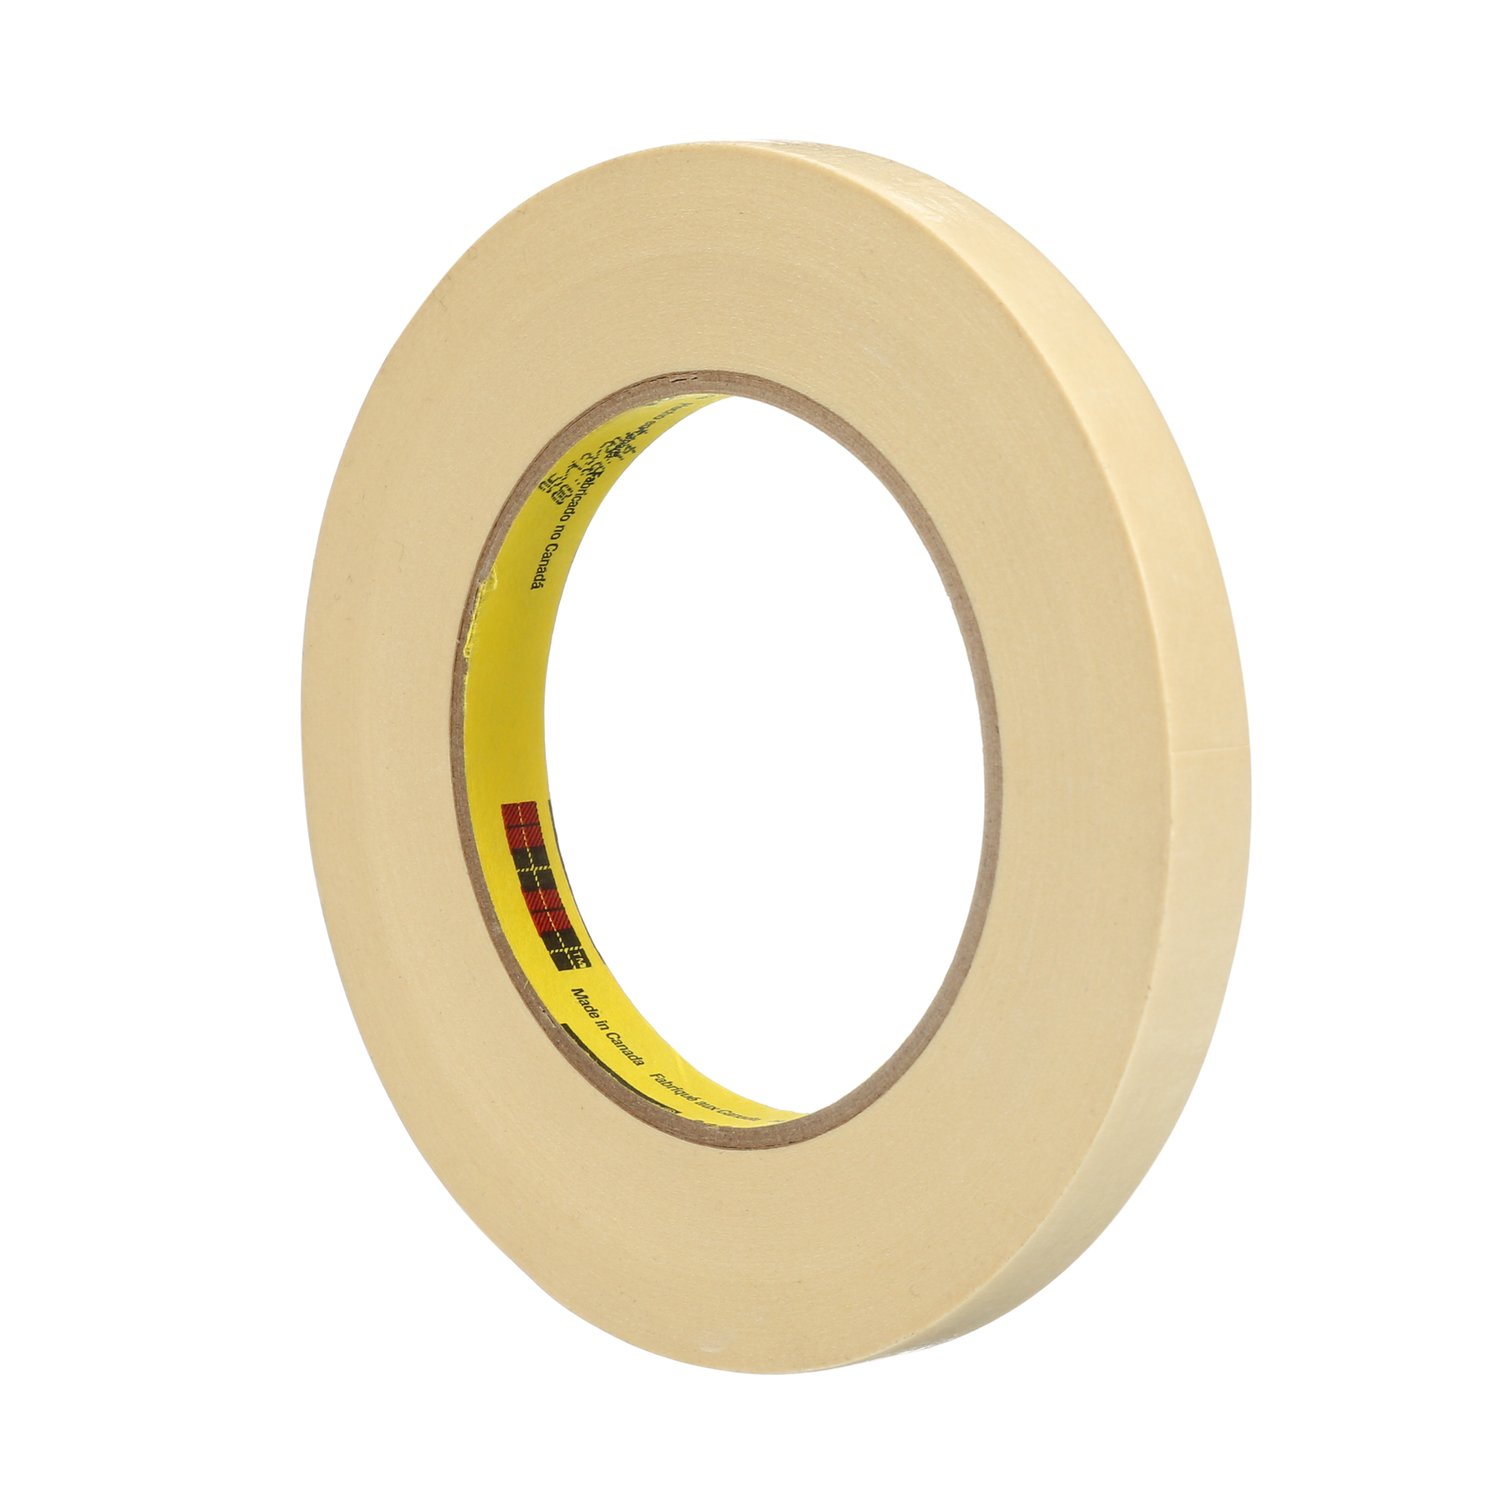 00021200711206, 3M Masking Tape 2307, Tan, 48 mm x 55 m, 5.2 mil, 24  Roll/Case, Aircraft products, 3M